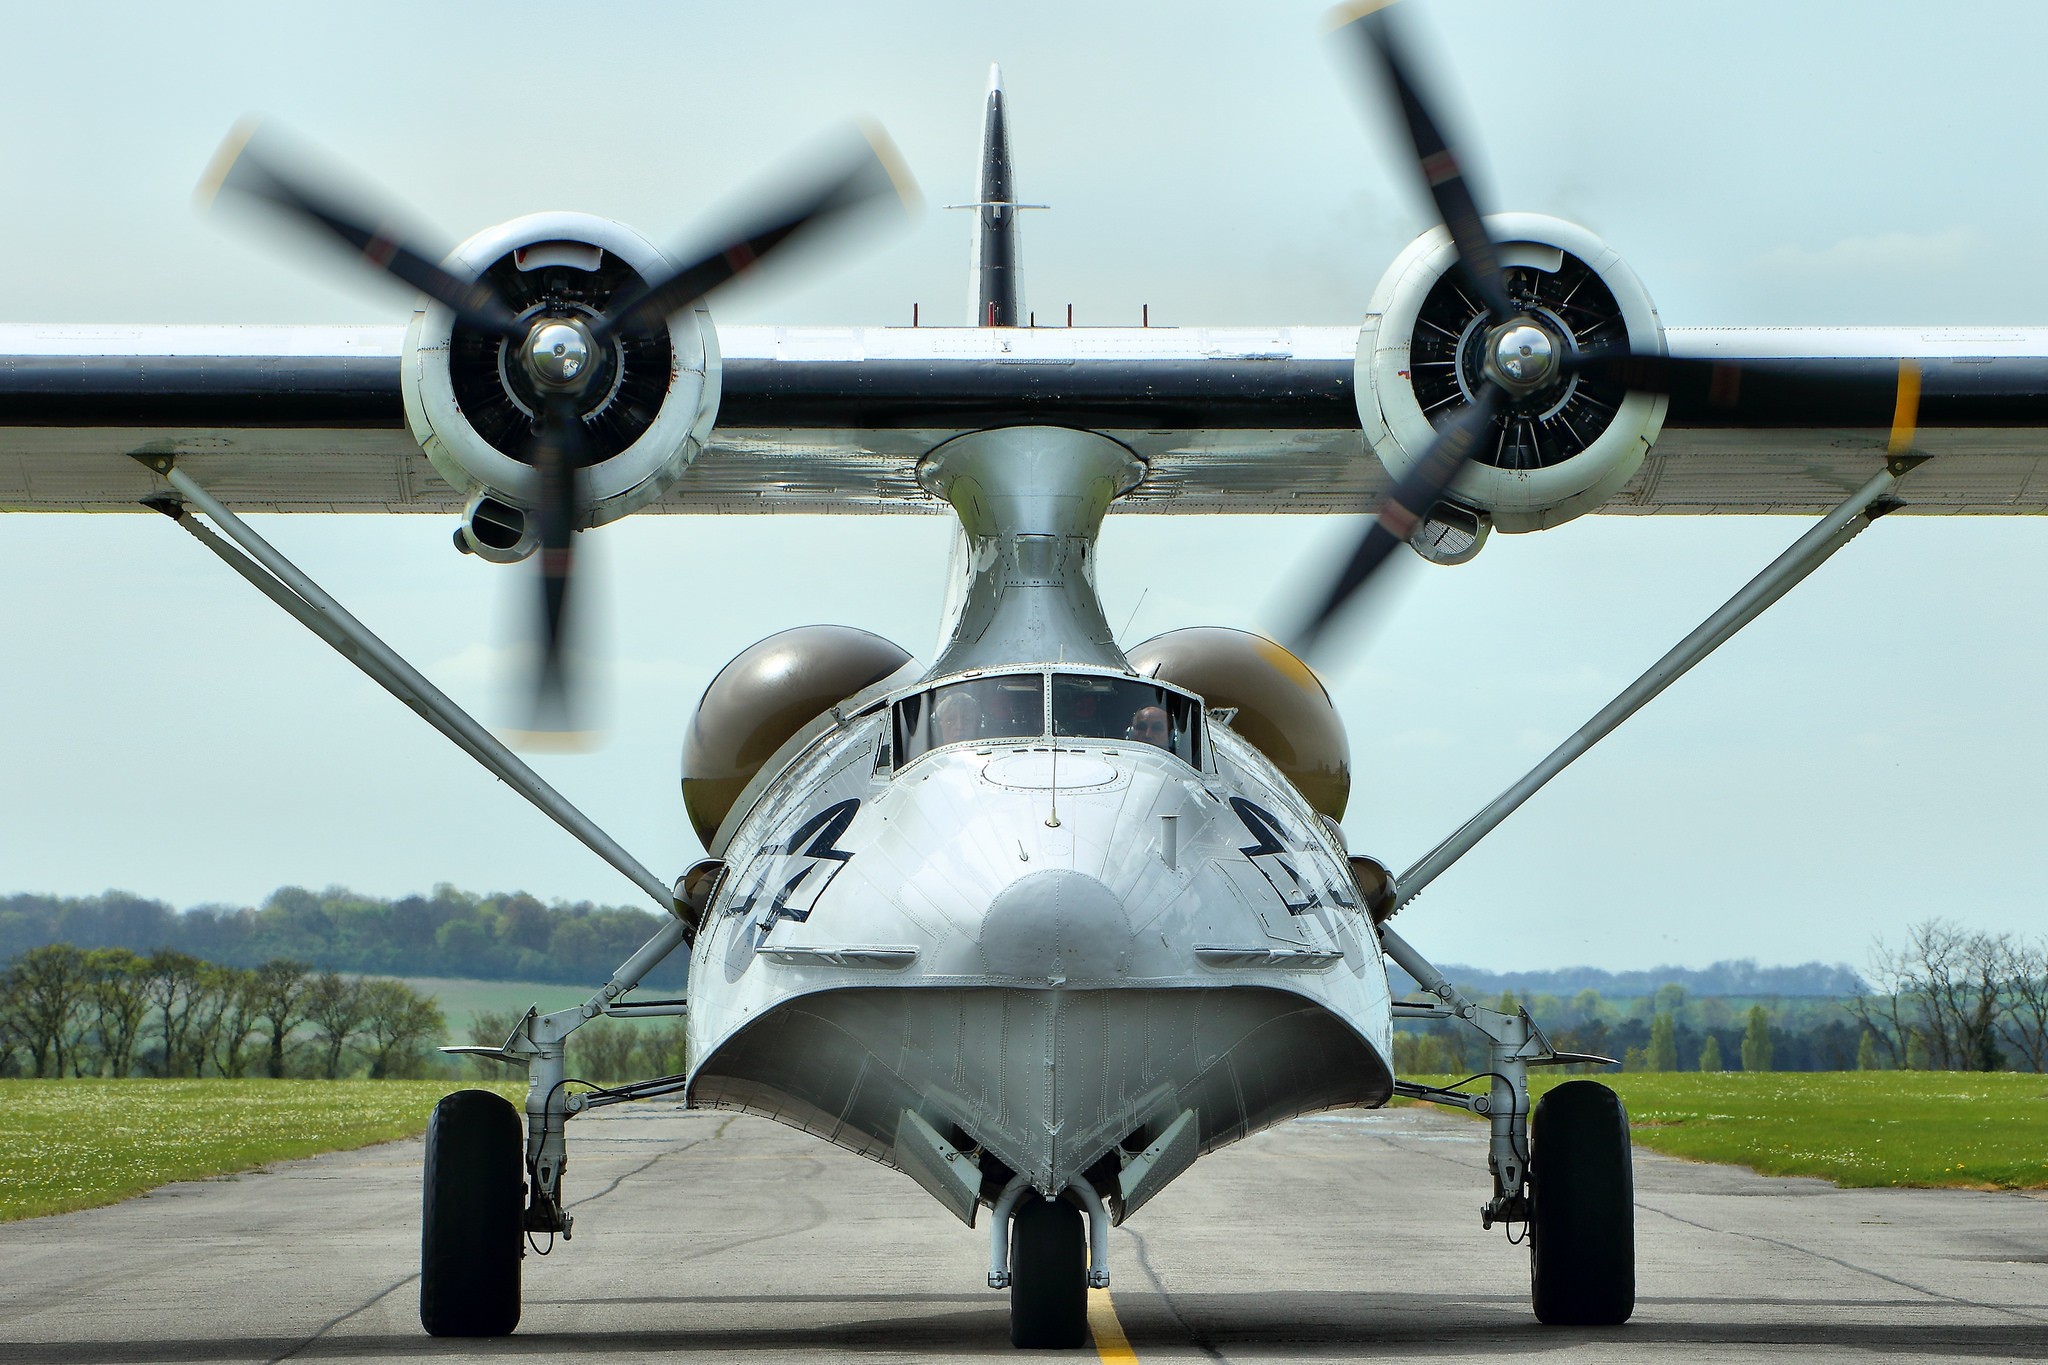 General 2048x1365 vehicle aircraft airplane star engine Consolidated PBY Catalina airfield frontal view American aircraft pilot